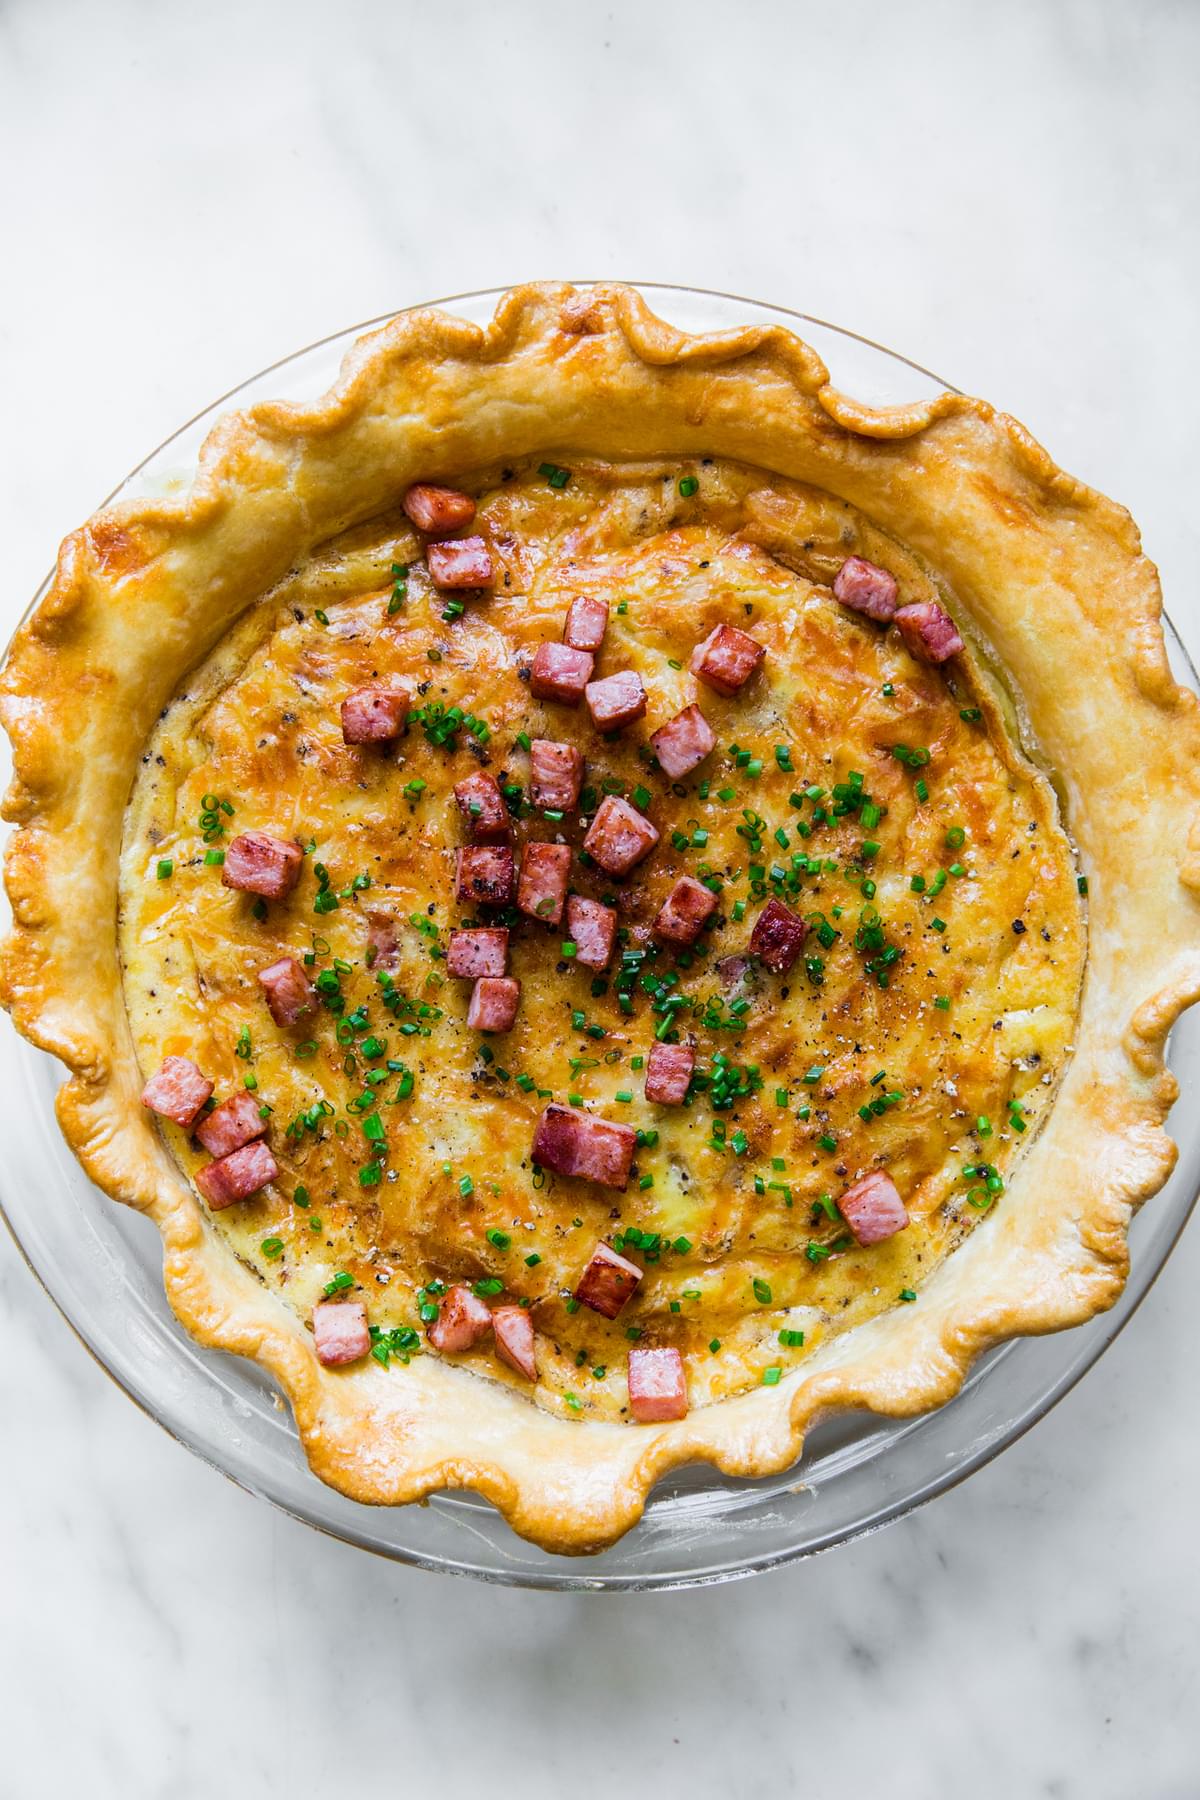 homemade quiche Lorraine topped with diced ham